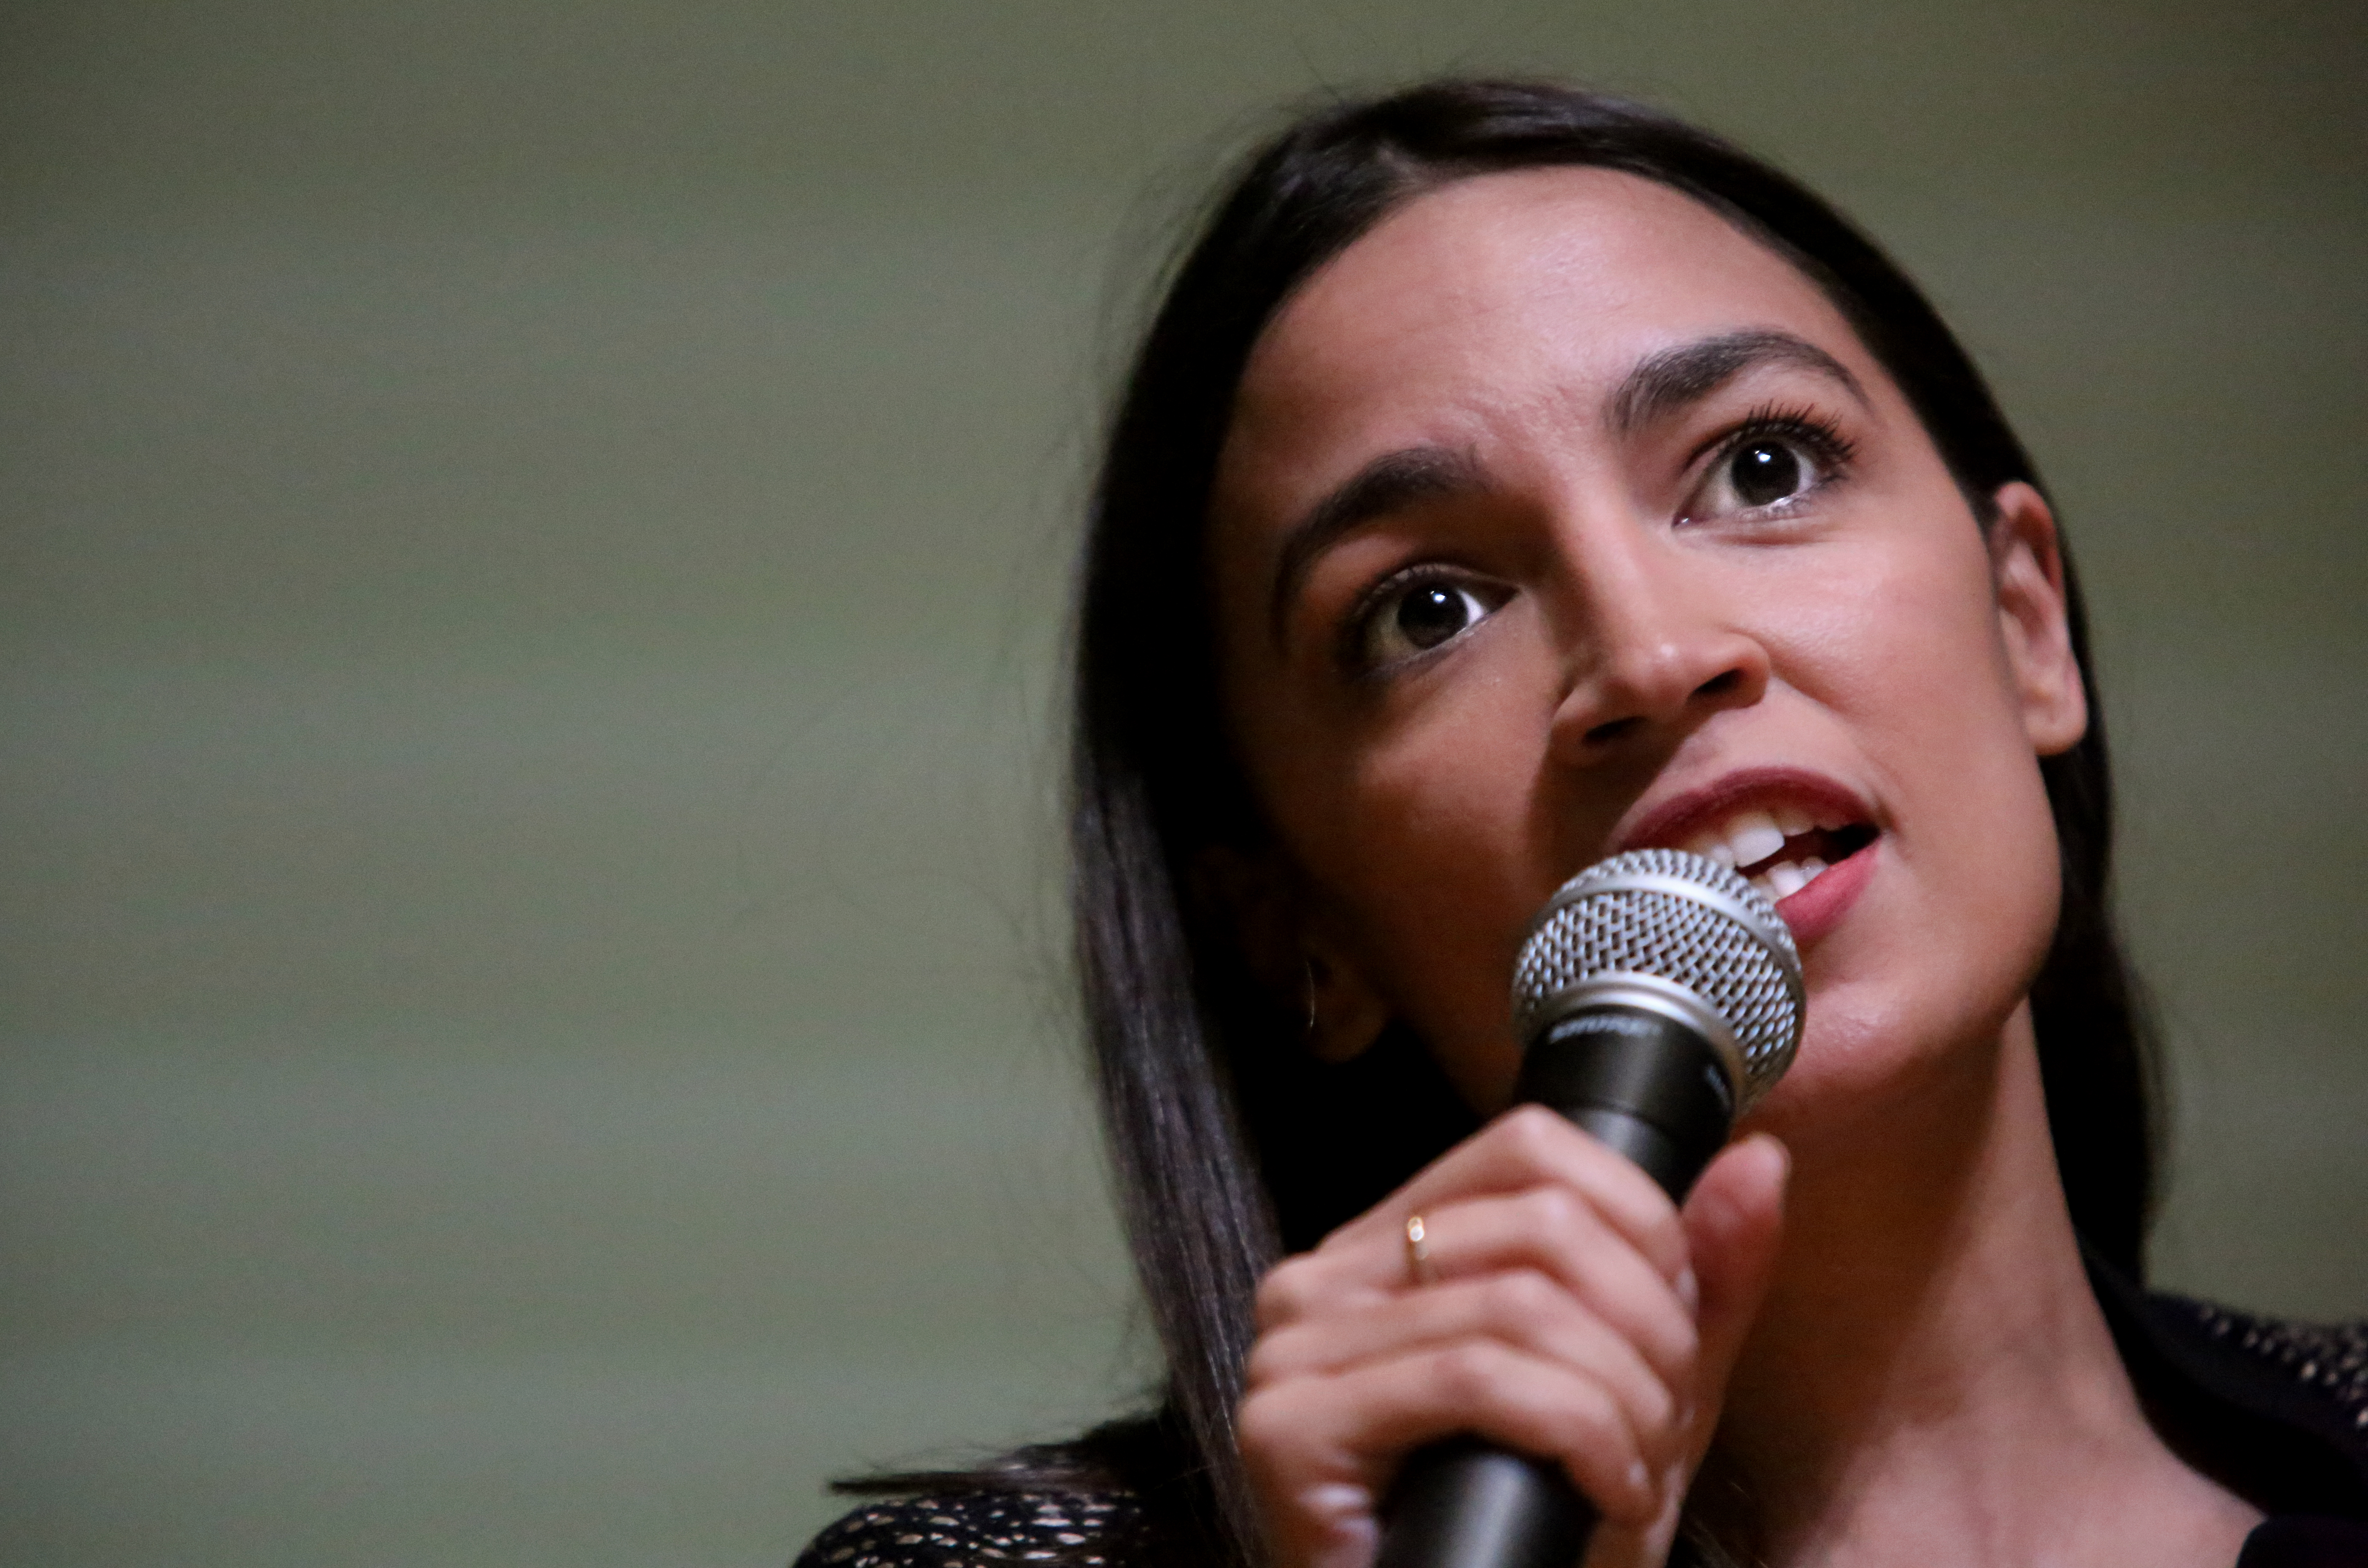 NEW YORK, NY - DECEMBER 14: Rep. Alexandria Ocasio-Cortez (D-NY) speaks during a Green New Deal For Public Housing Town Hall on December 14, 2019 in the Queens borough of New York City. (Photo by Yana Paskova/Getty Images)